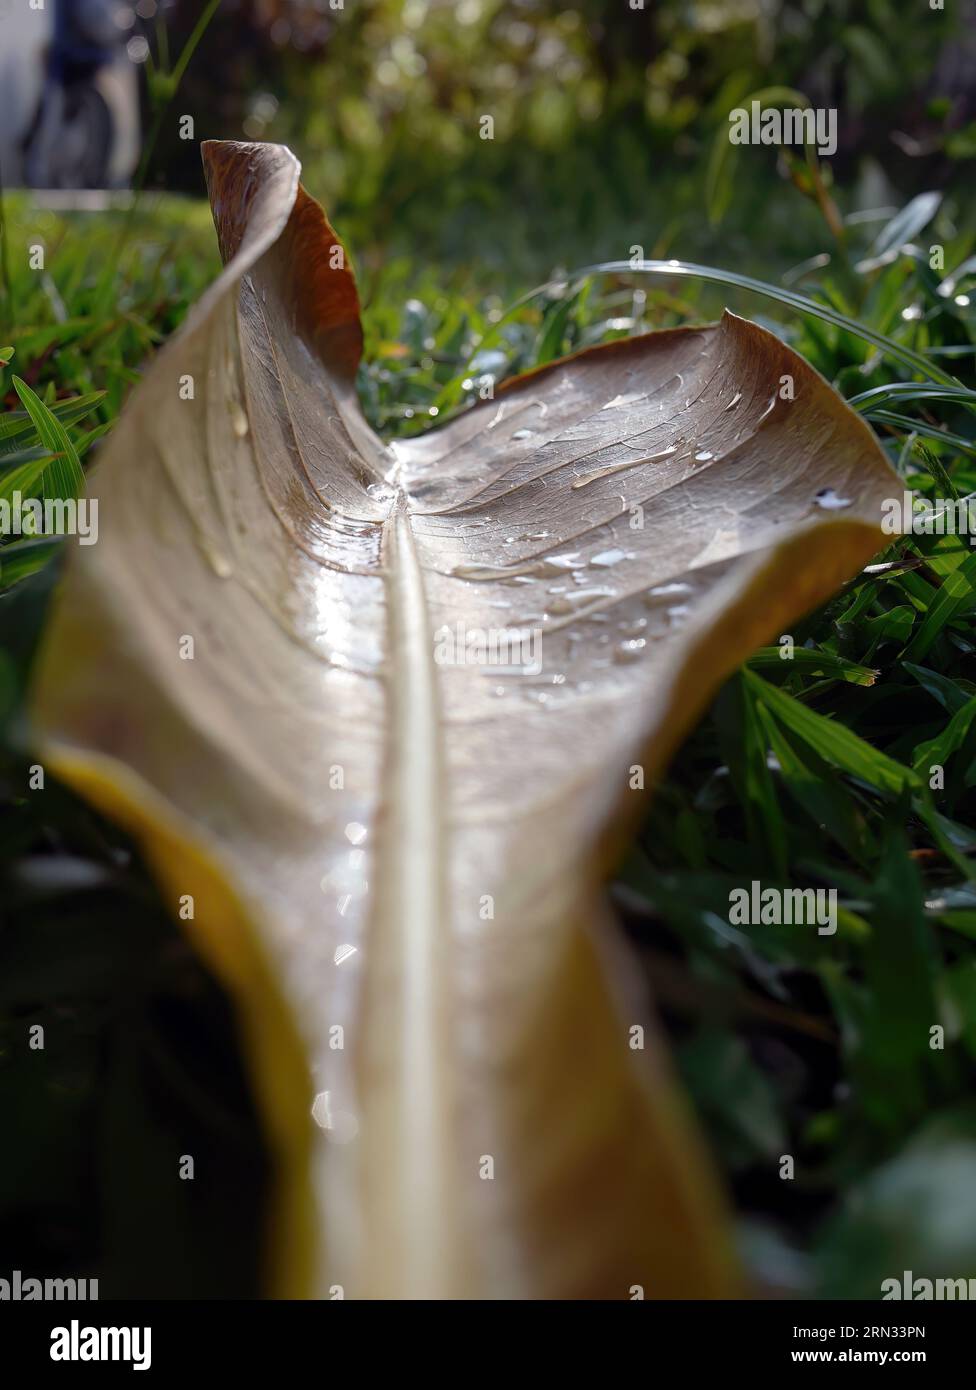 Selective focus ground view of single dried leaf fallen on the green with rain drops or dew after the morning rain, nature background for wallpaper Stock Photo